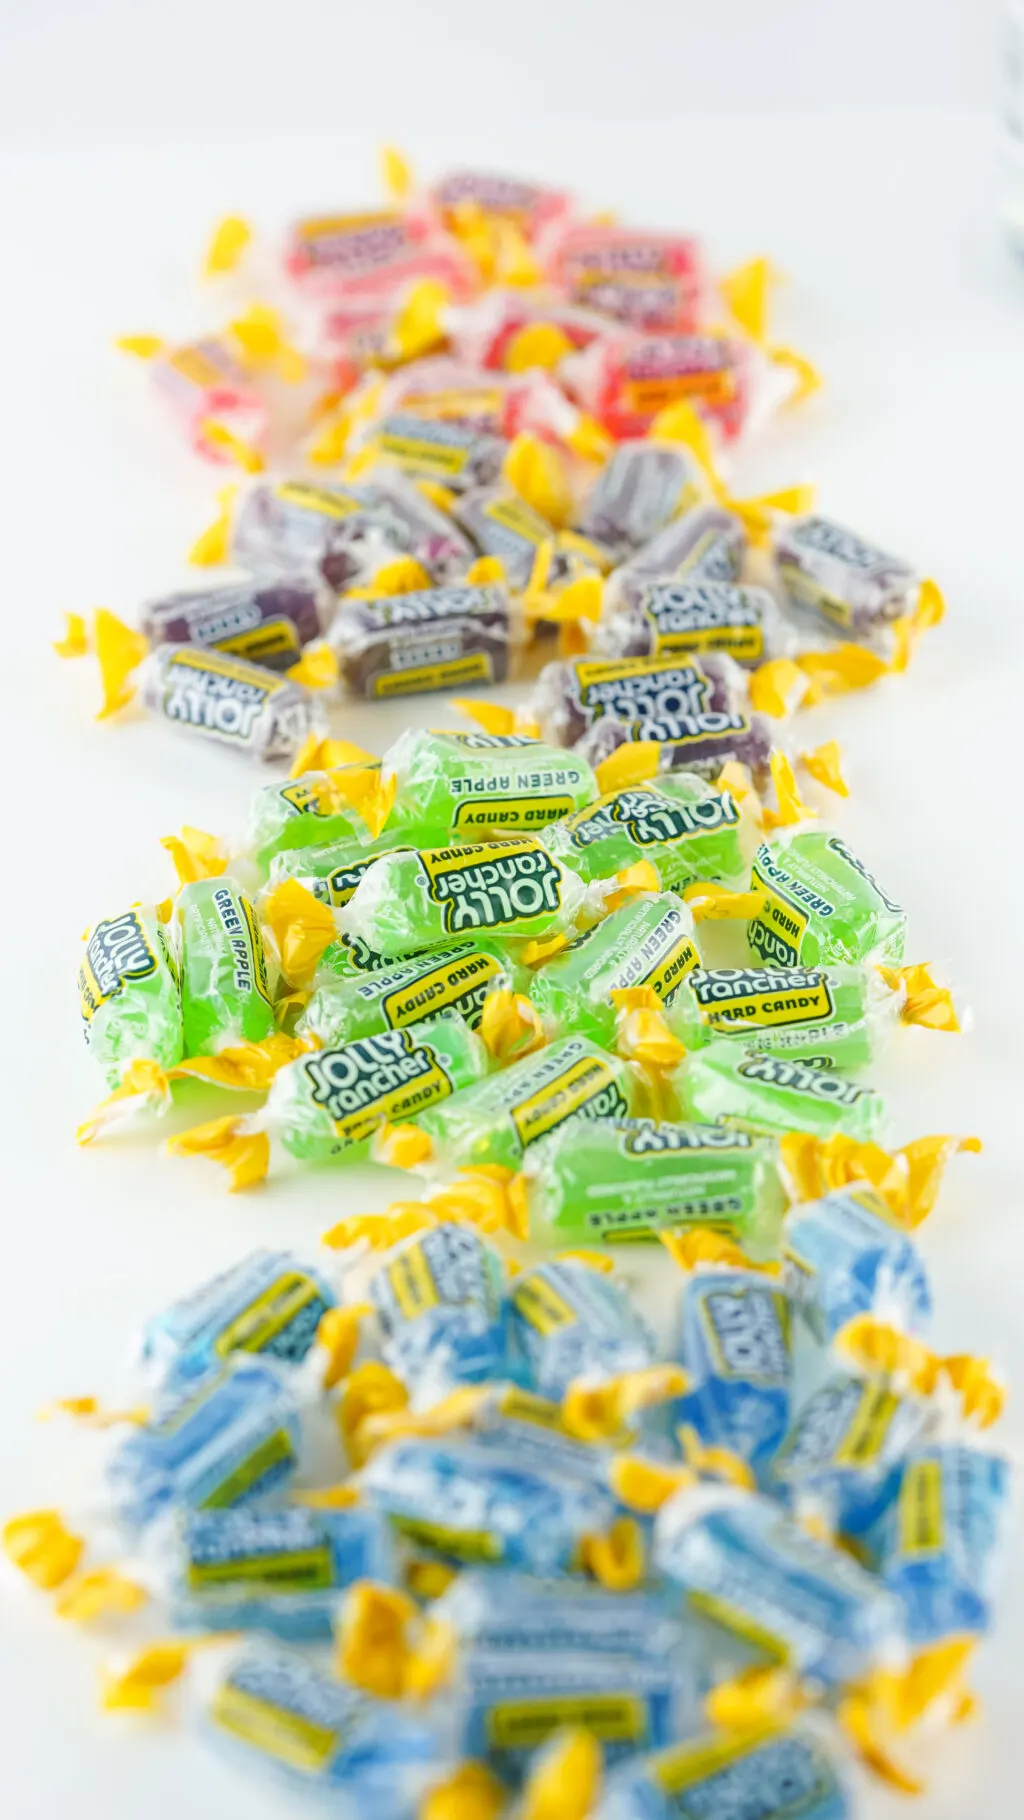 jolly ranchers sorted by color on white table